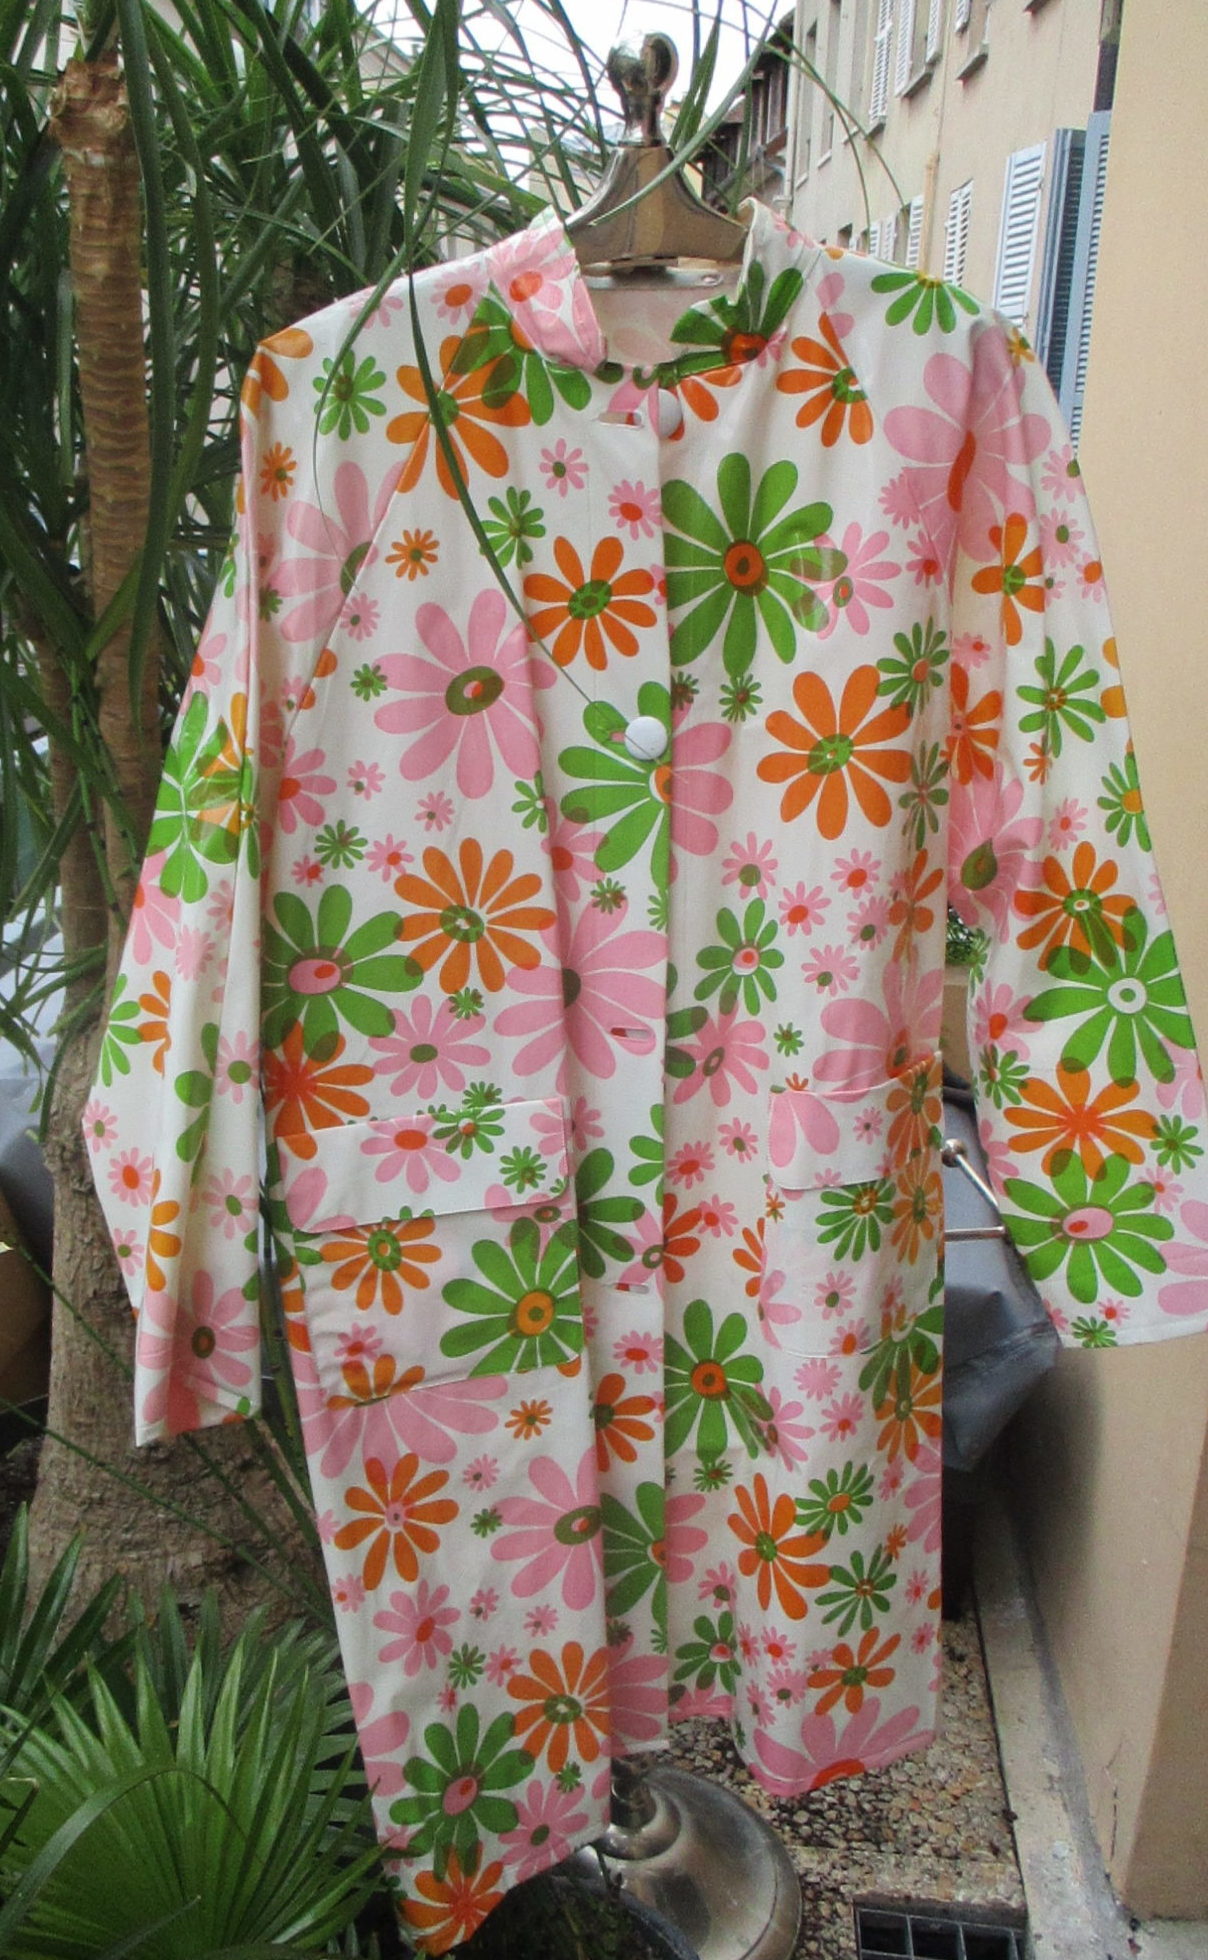 THE raincoat 1960s raincoat in pink , green and white SOLD